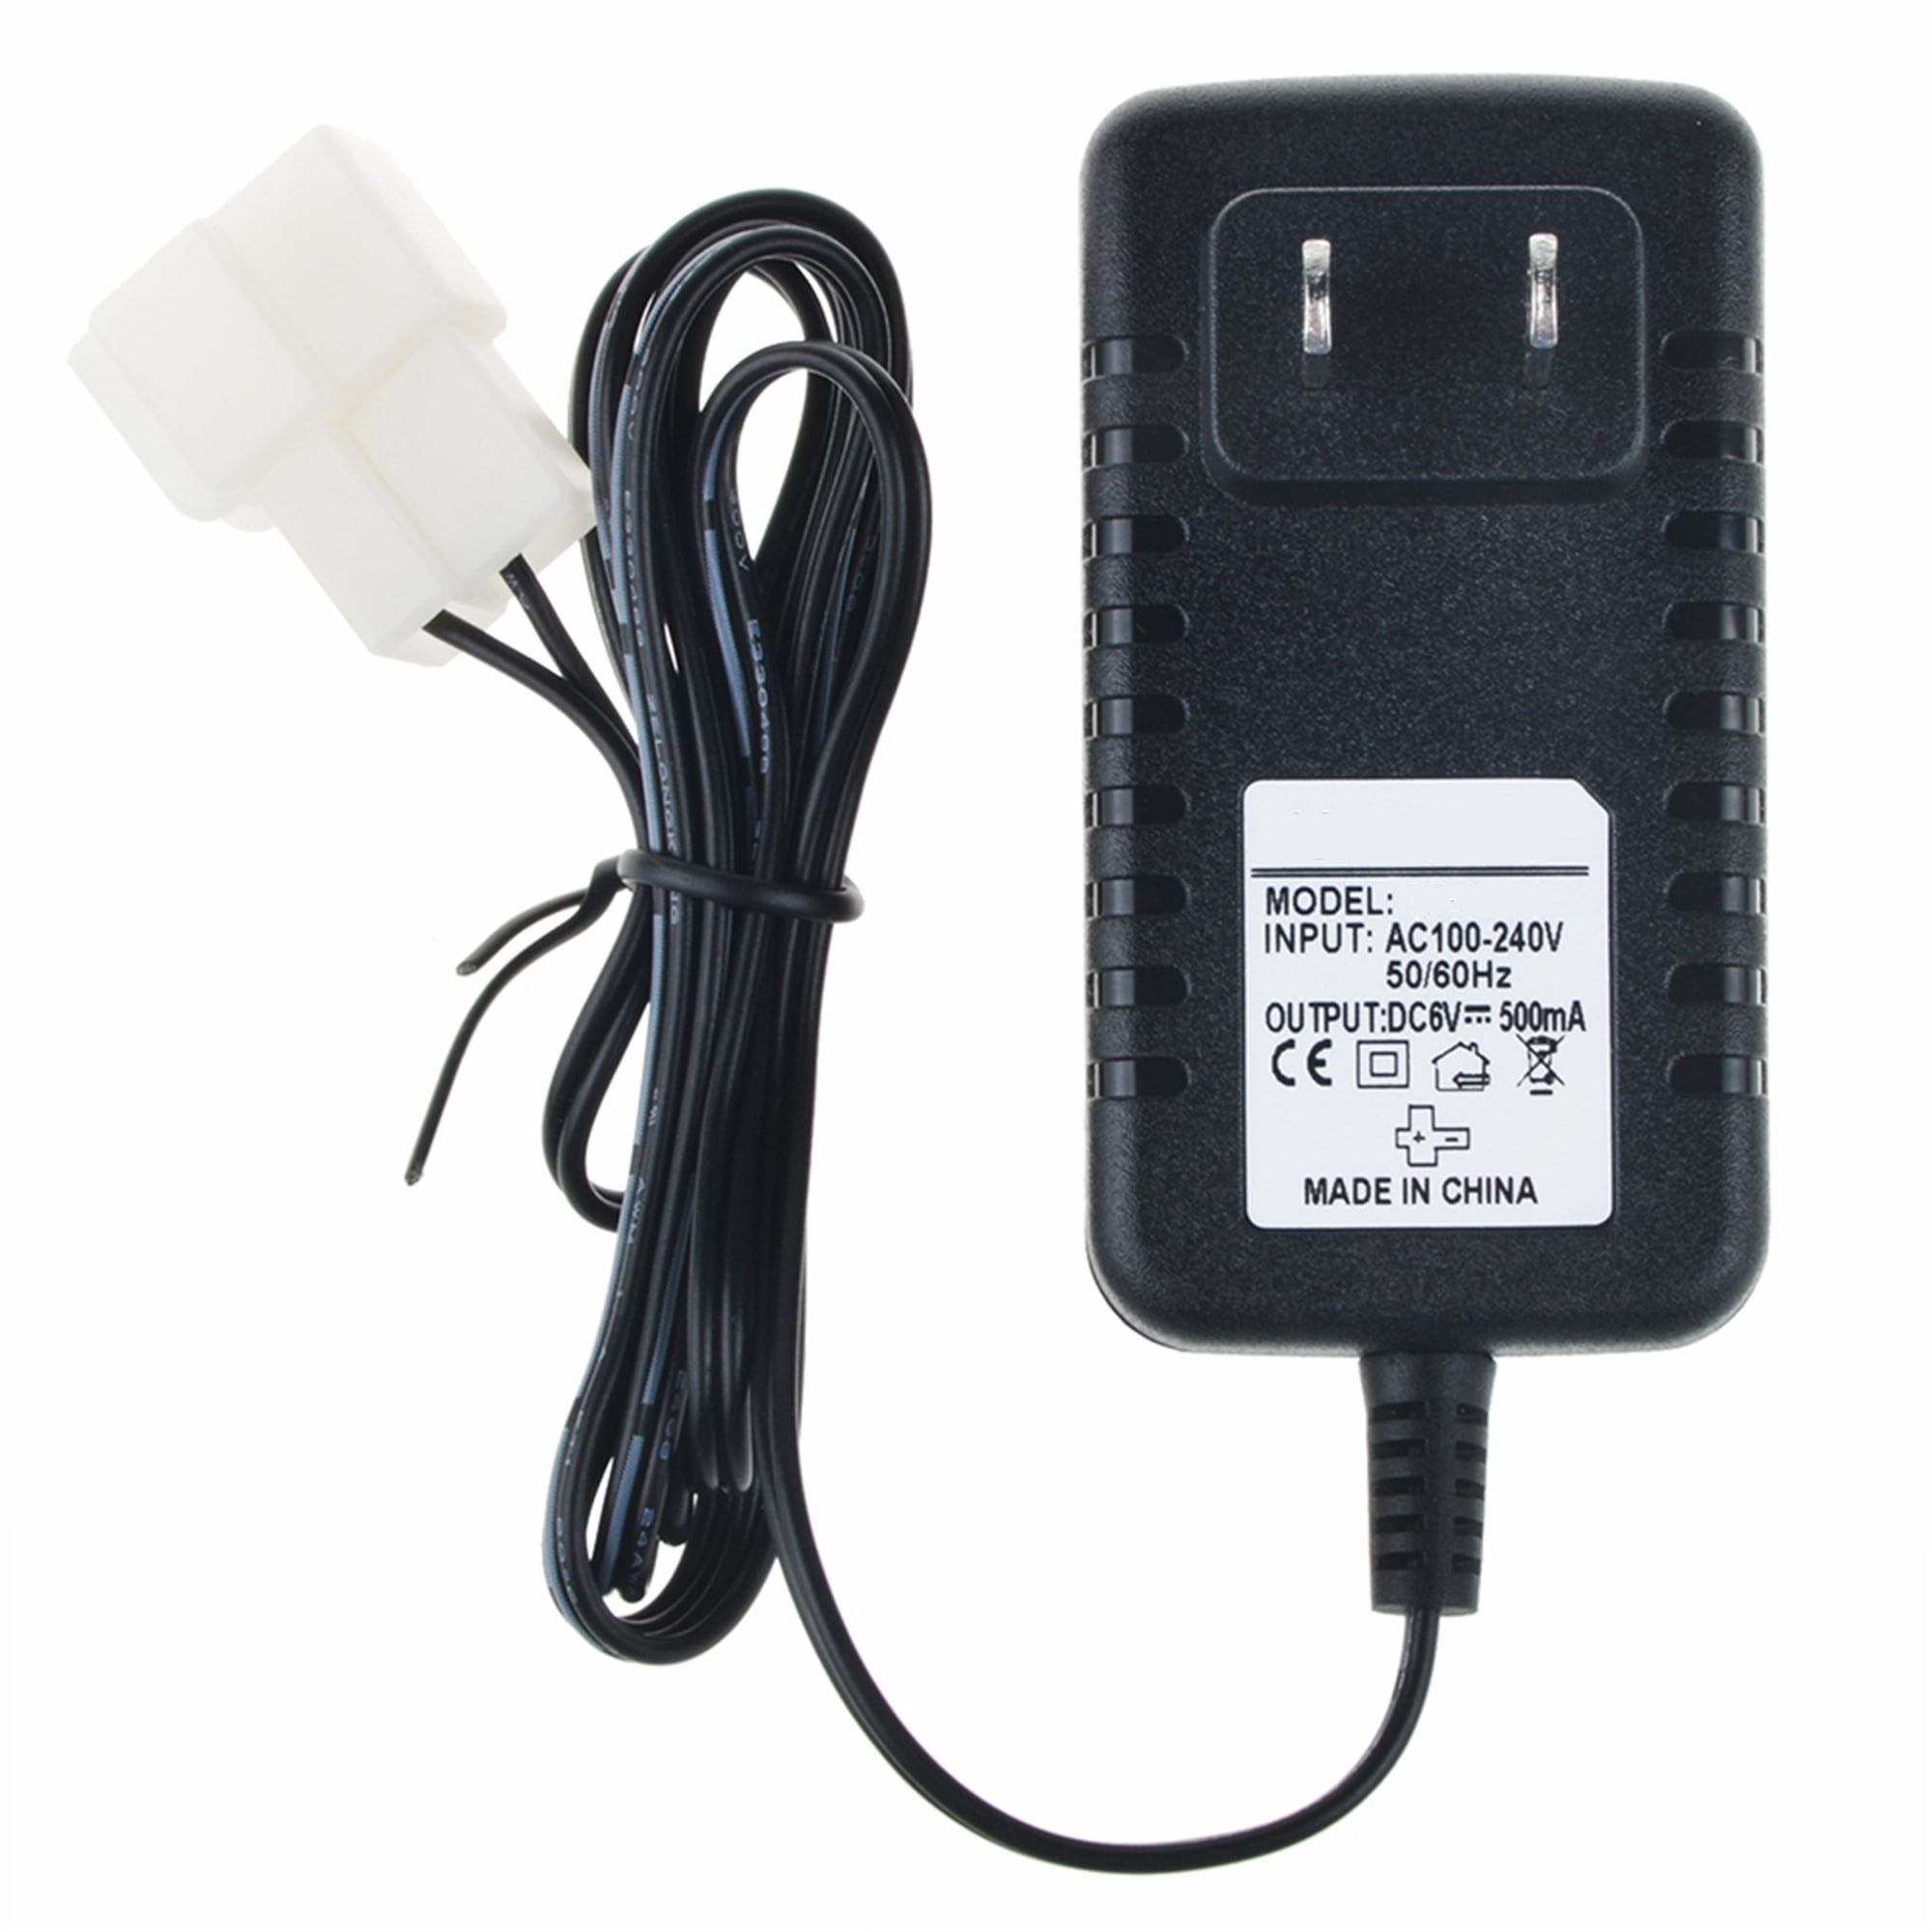 6V Wall Charger AC Adapter For Battery Powered Kid TRAX ATV Quad Ride On Car New 